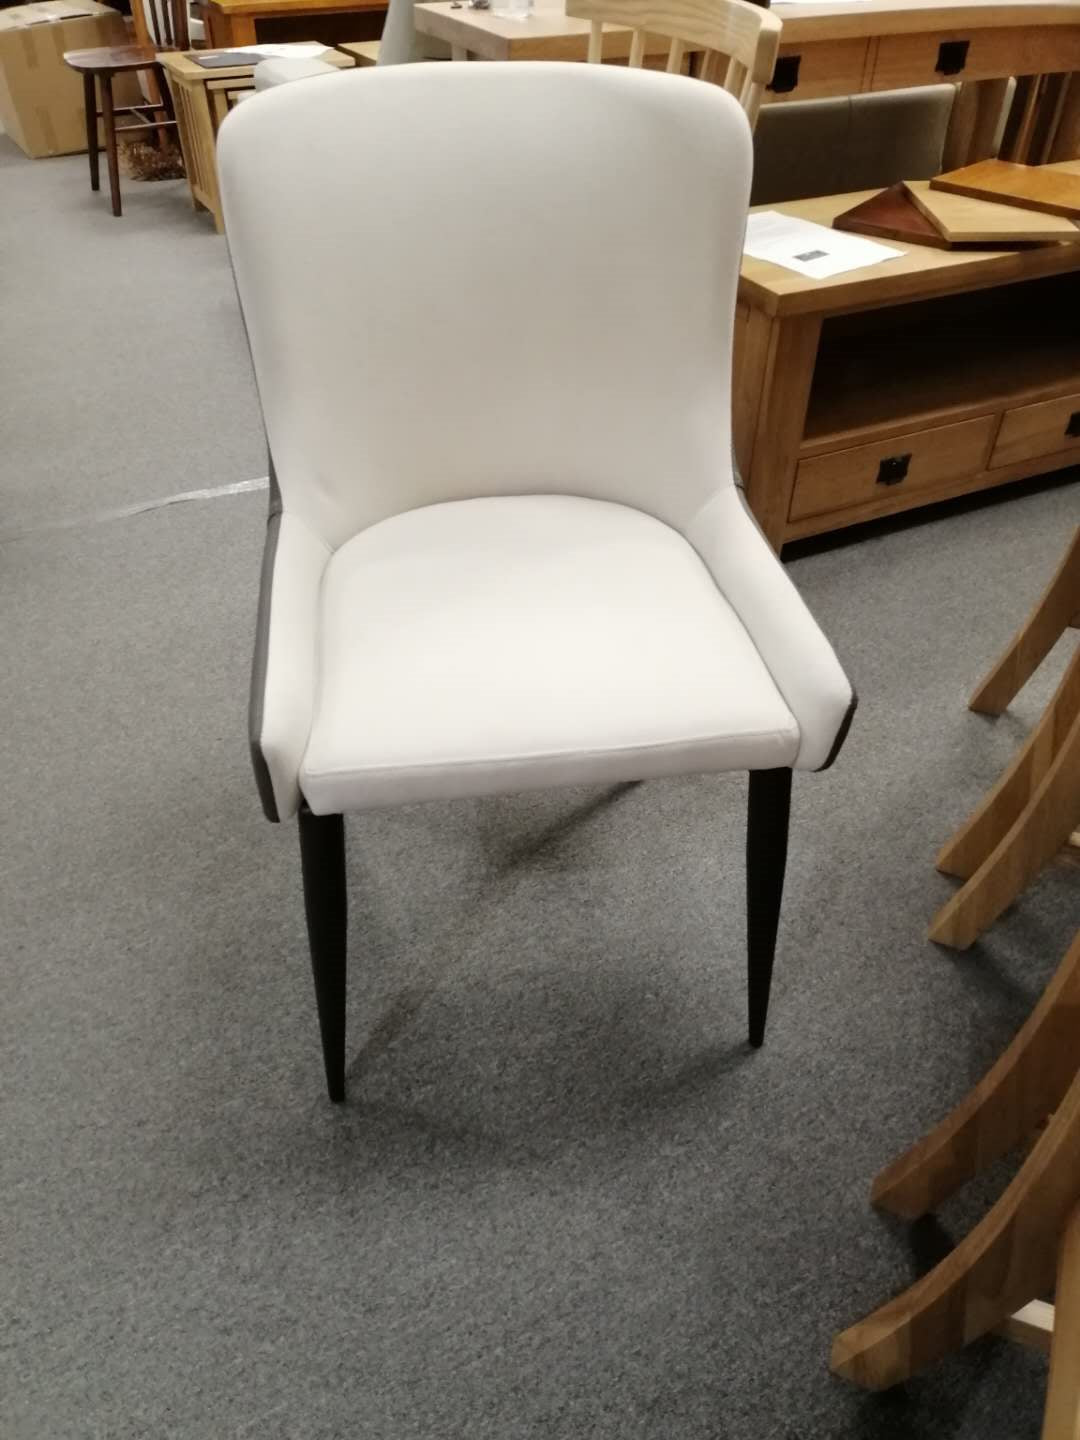 Elegant Italian Design Microfiber leather Dining Chair #1829, 2 color in stock now